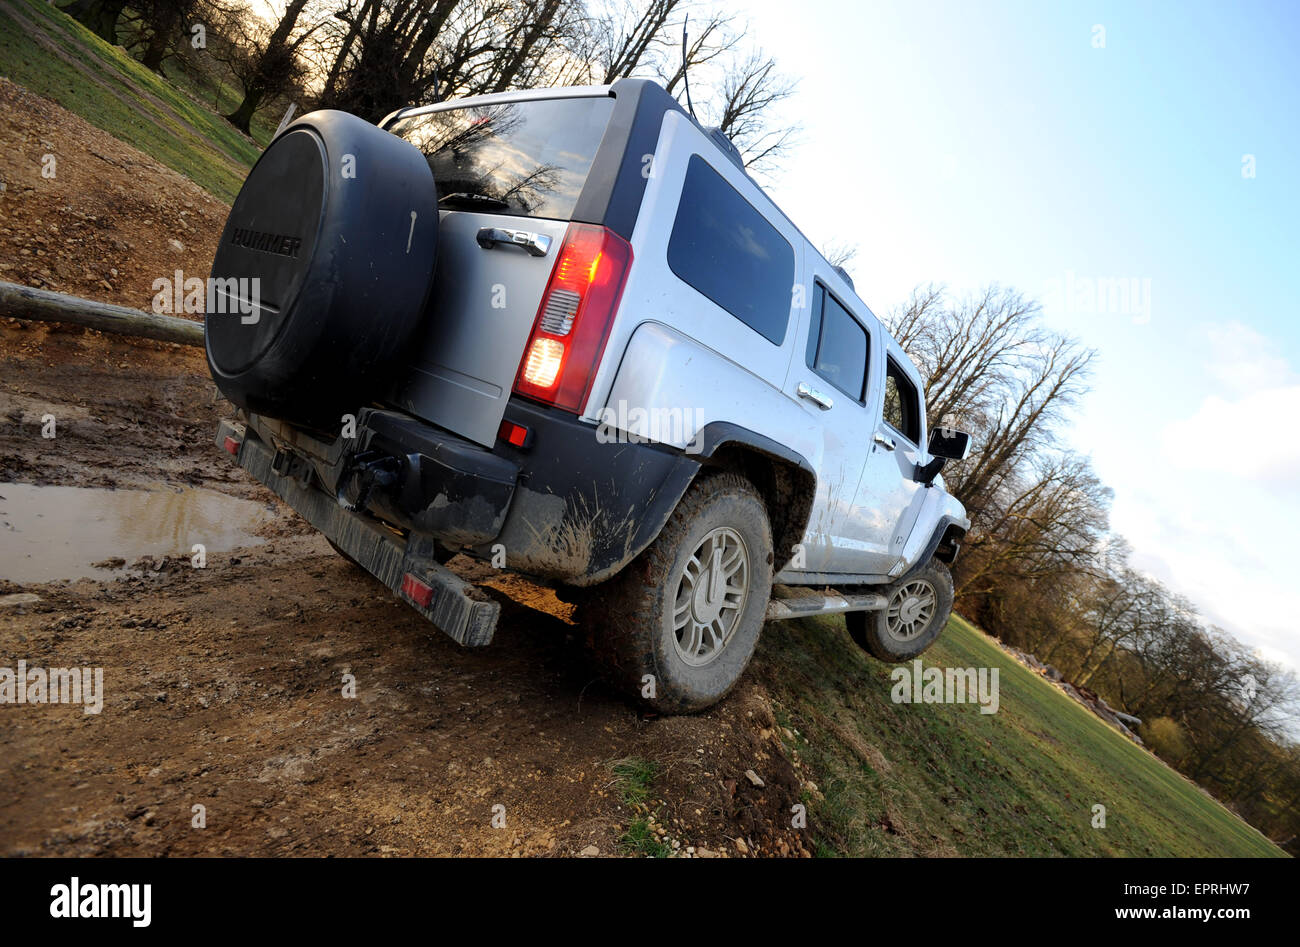 Hummer H3 driving off road and lifting a wheel Stock Photo